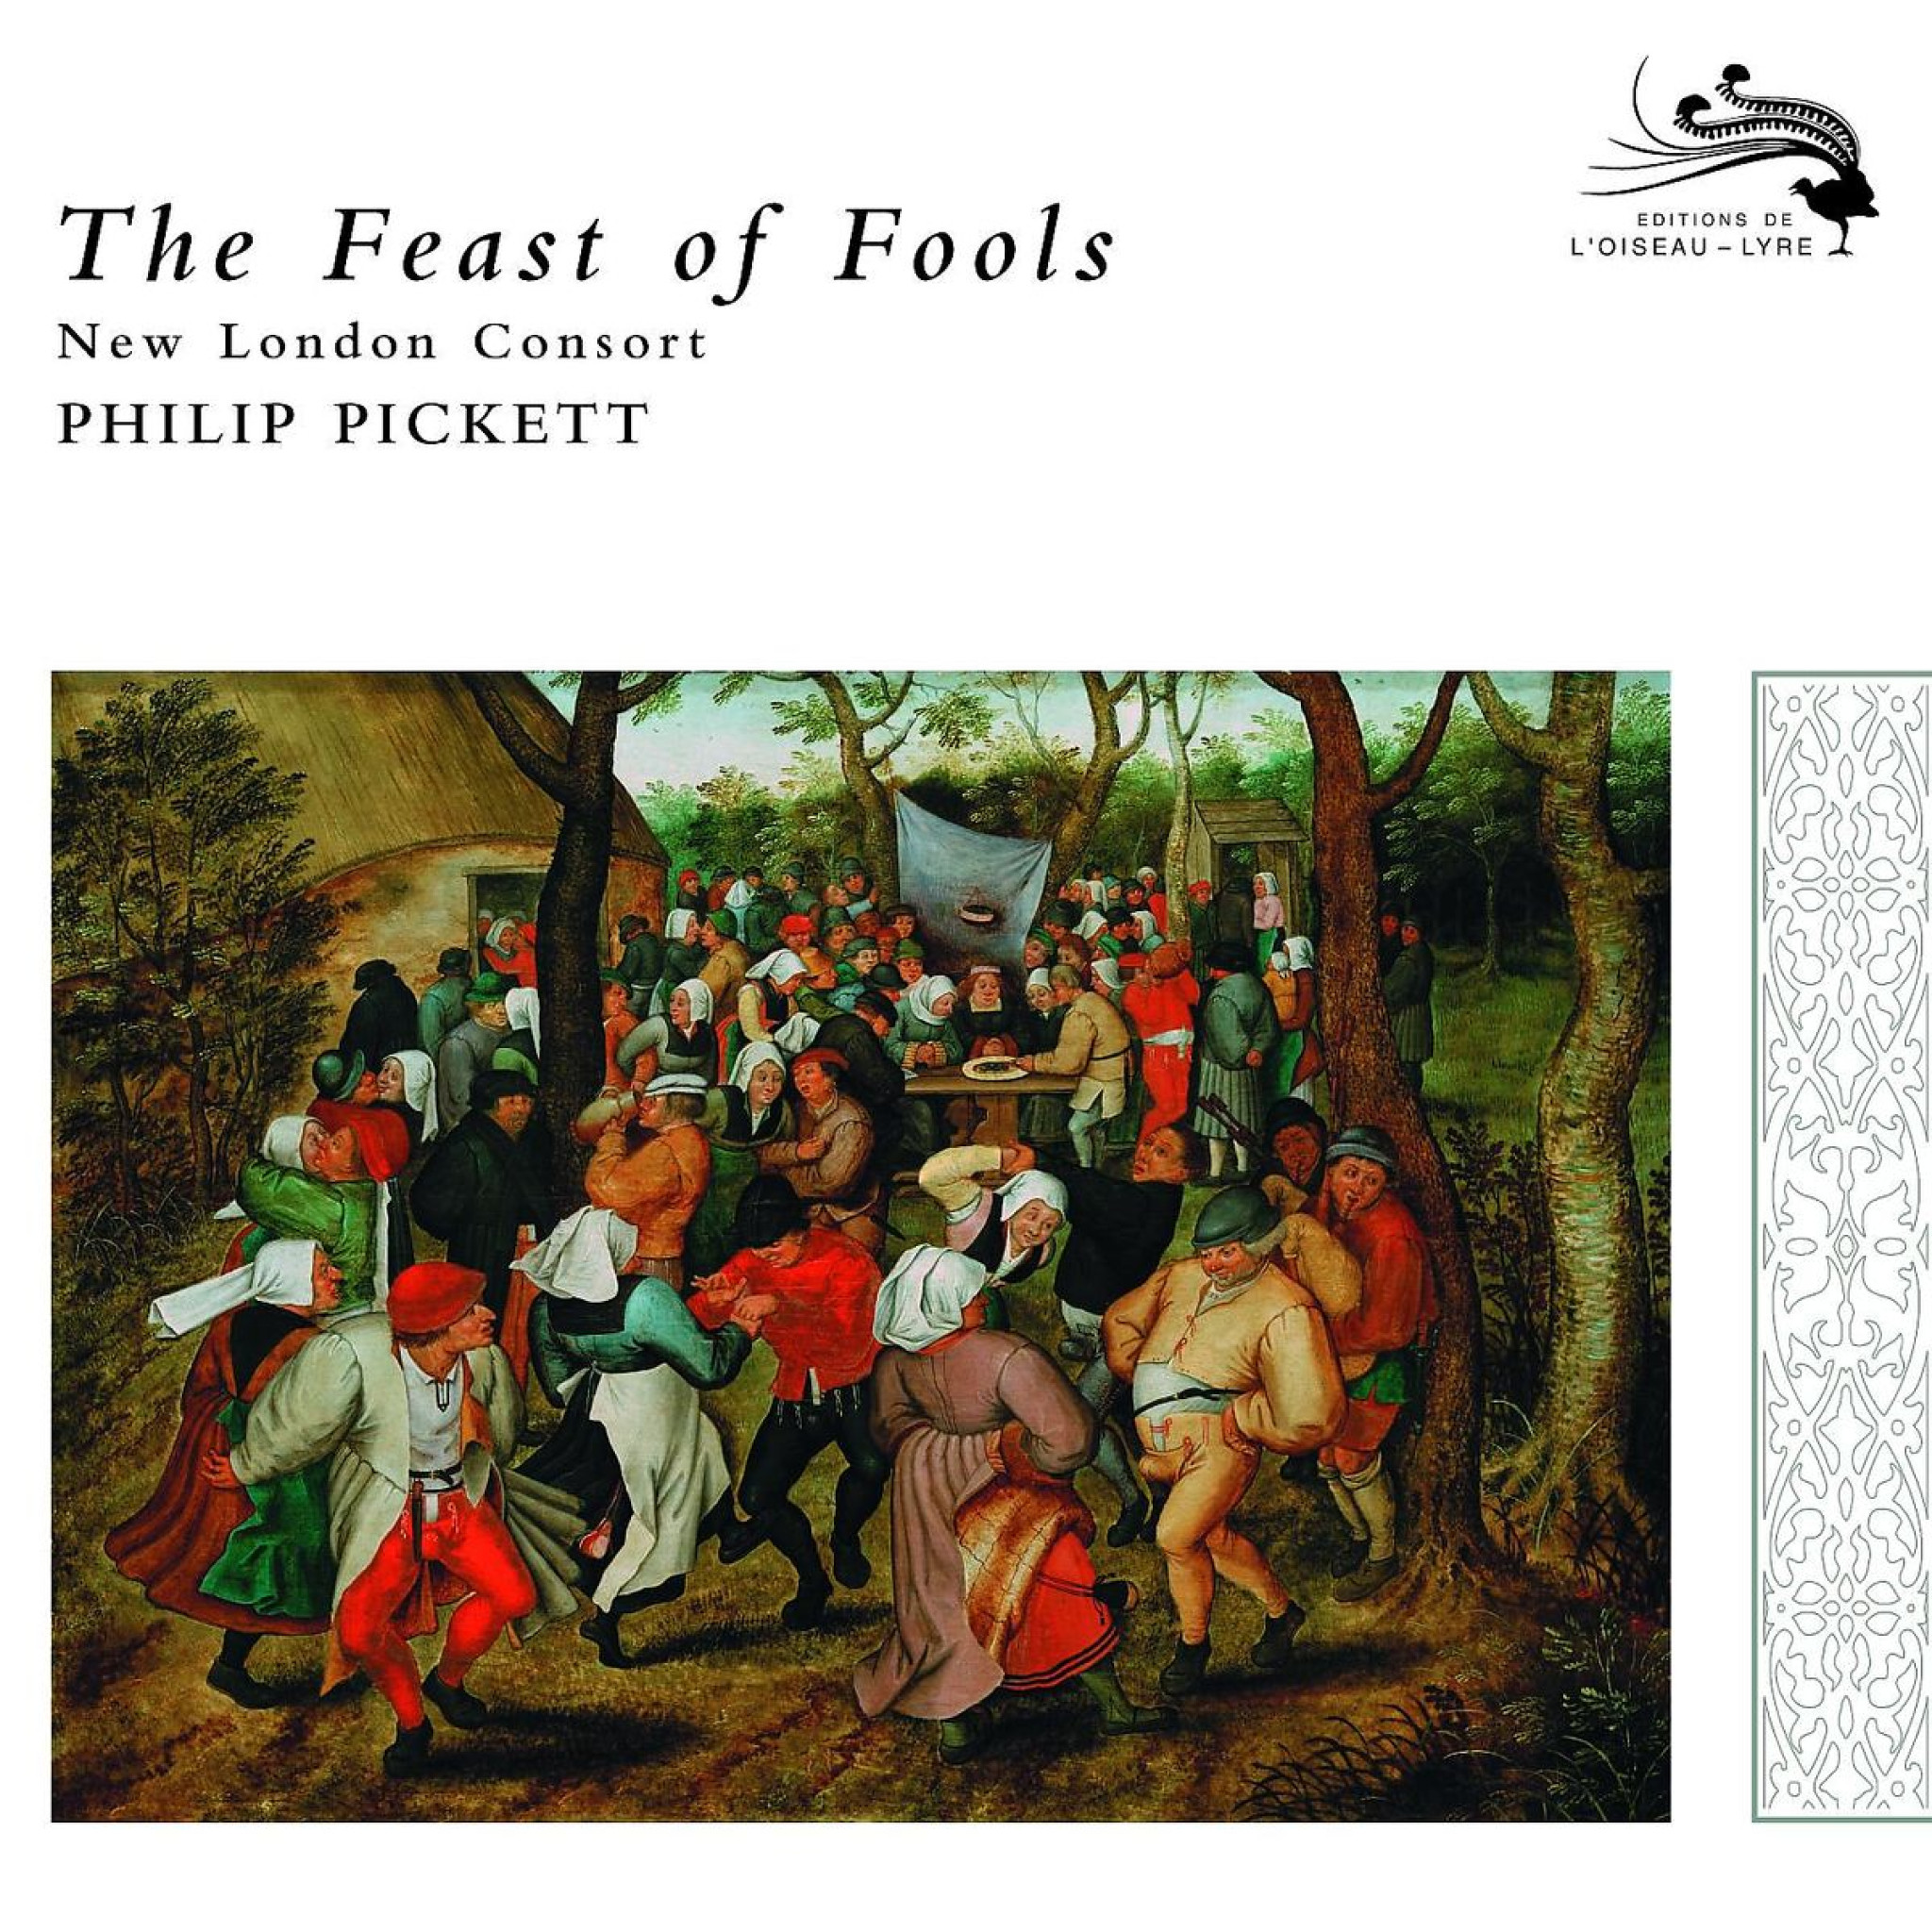 THE FEAST OF FOOLS NEW LONDON CONSORT